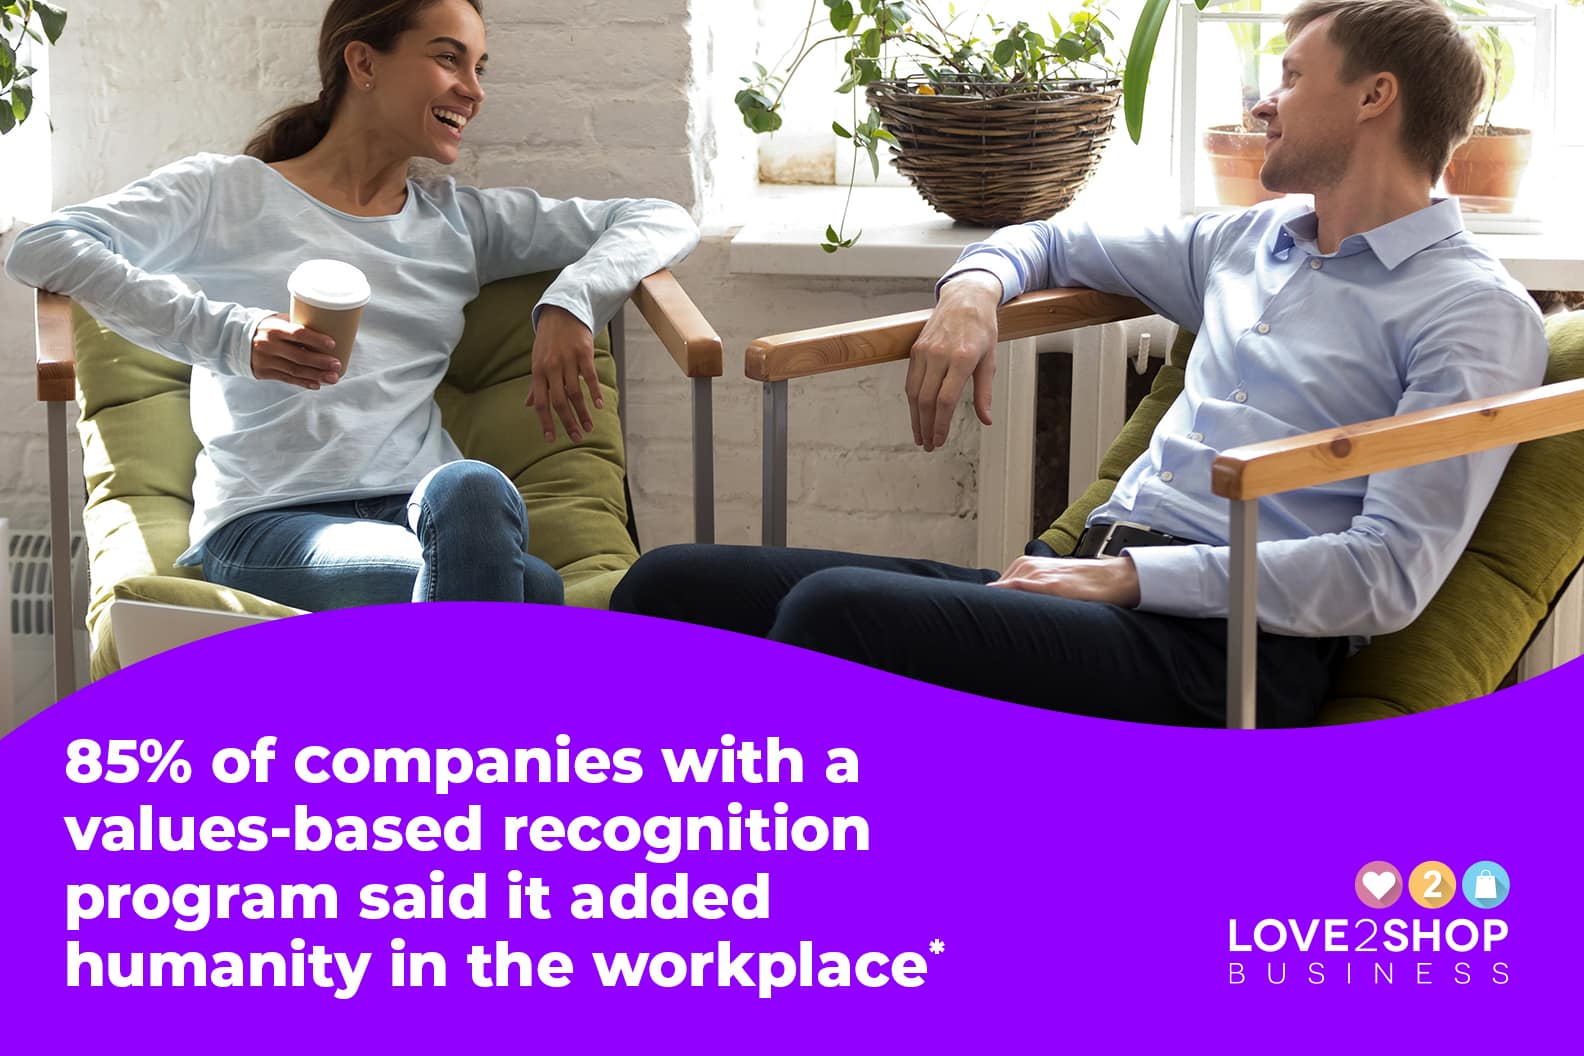 Recognition adds humanity to the workplace